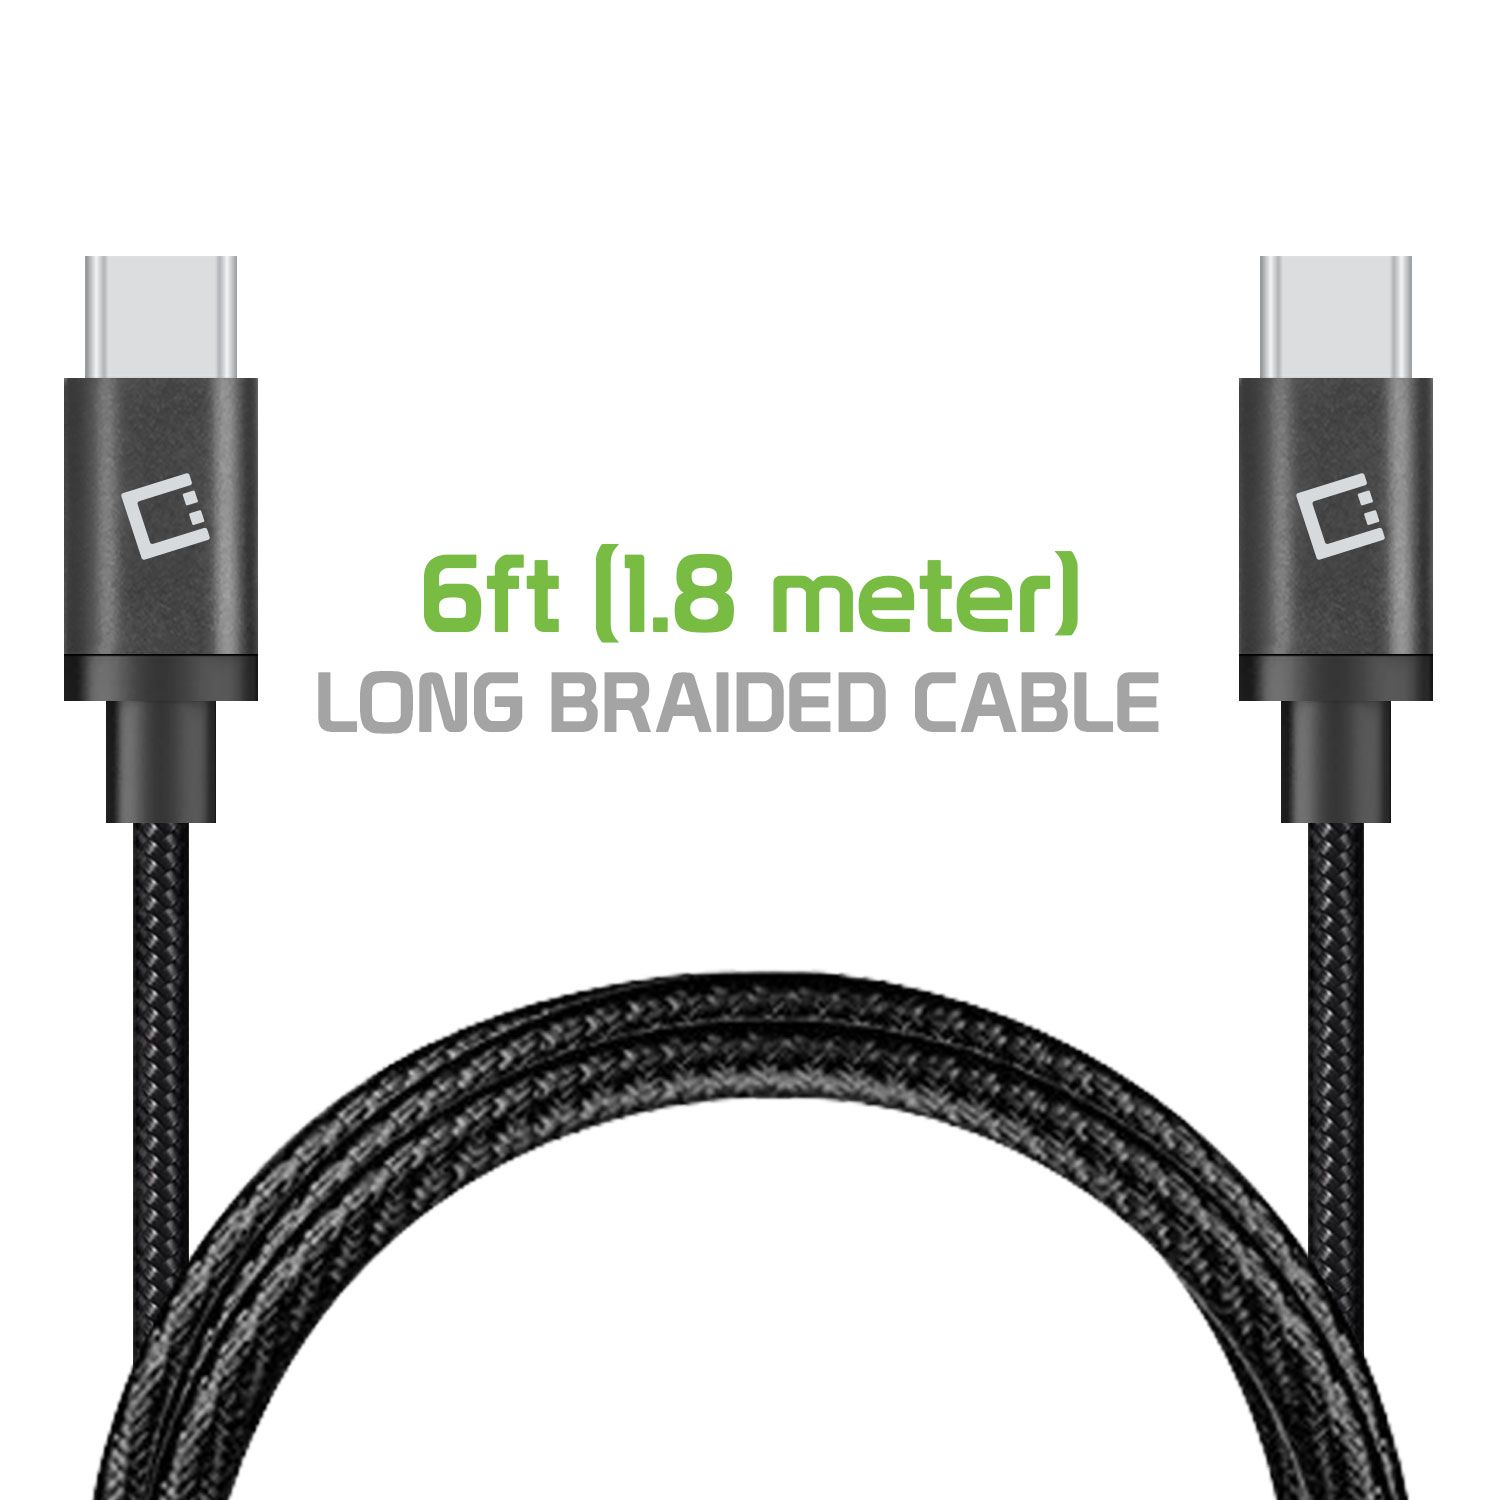 Cellet USB-C to USB-C Cable Compatible with Samsung Galaxy S20, S20+ Plus, S20 Ultra, Heavy Duty Braided USB Type-C to Type-C Cable (6 feet/1.8 meters) and Atom Wipe - image 3 of 9